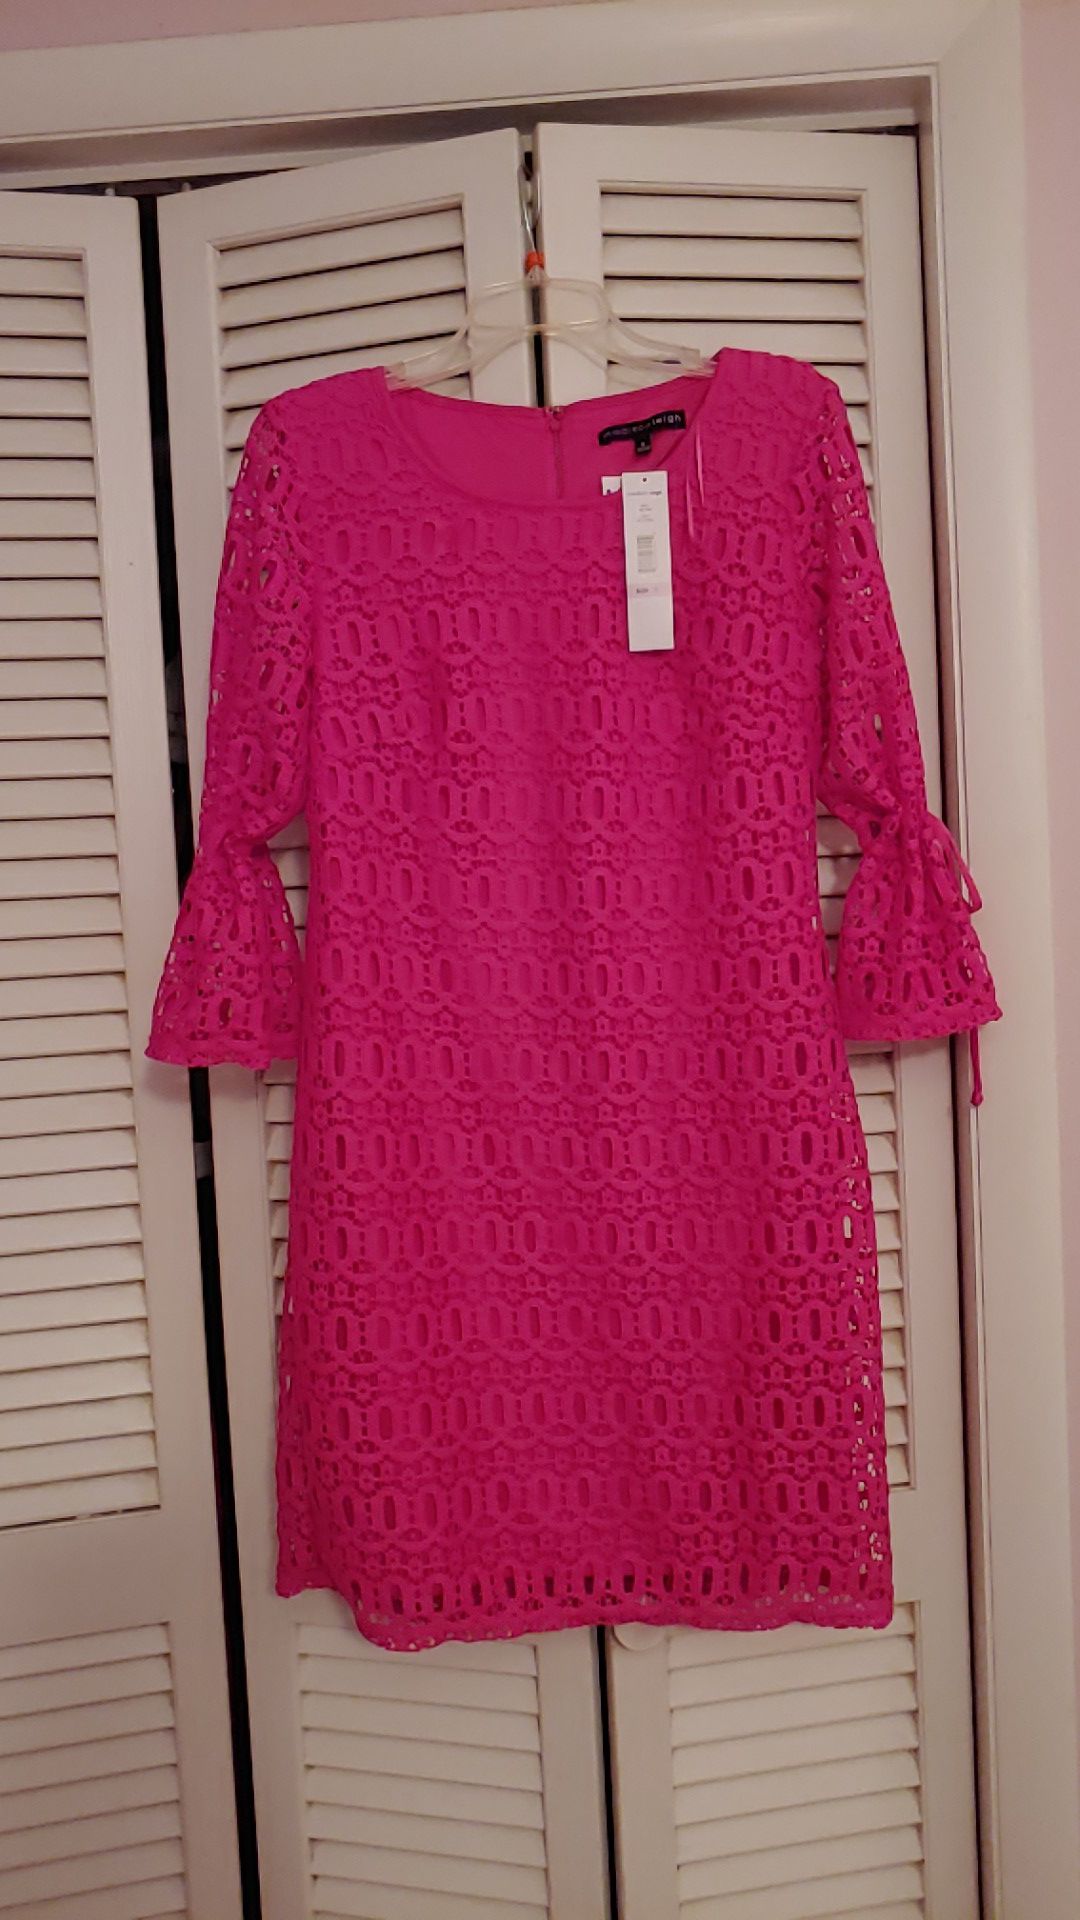 NWT Madison Leigh Hot Pink Body con size 6